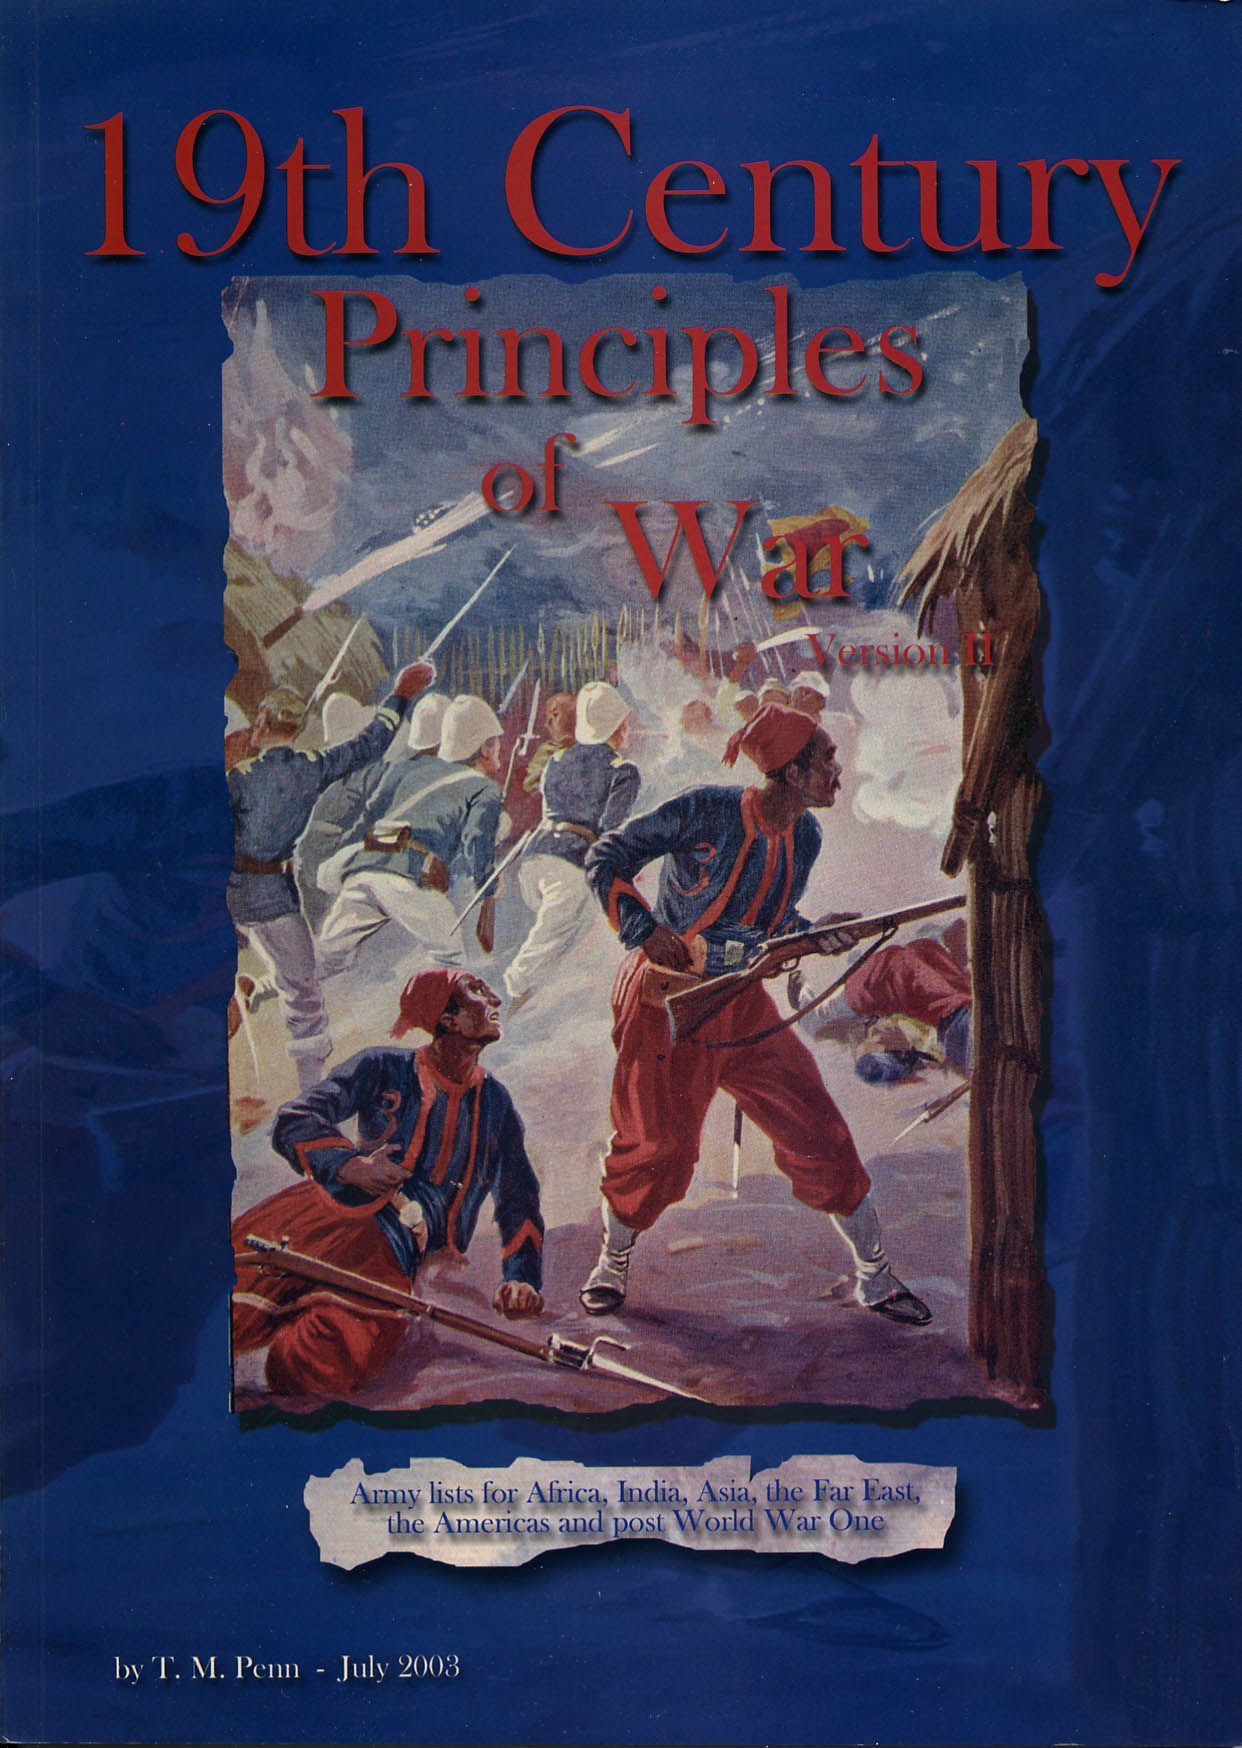 Principles of War: 19th Century – Army Lists for Africa, India, Asia, the Far East, the Americas and post World War One